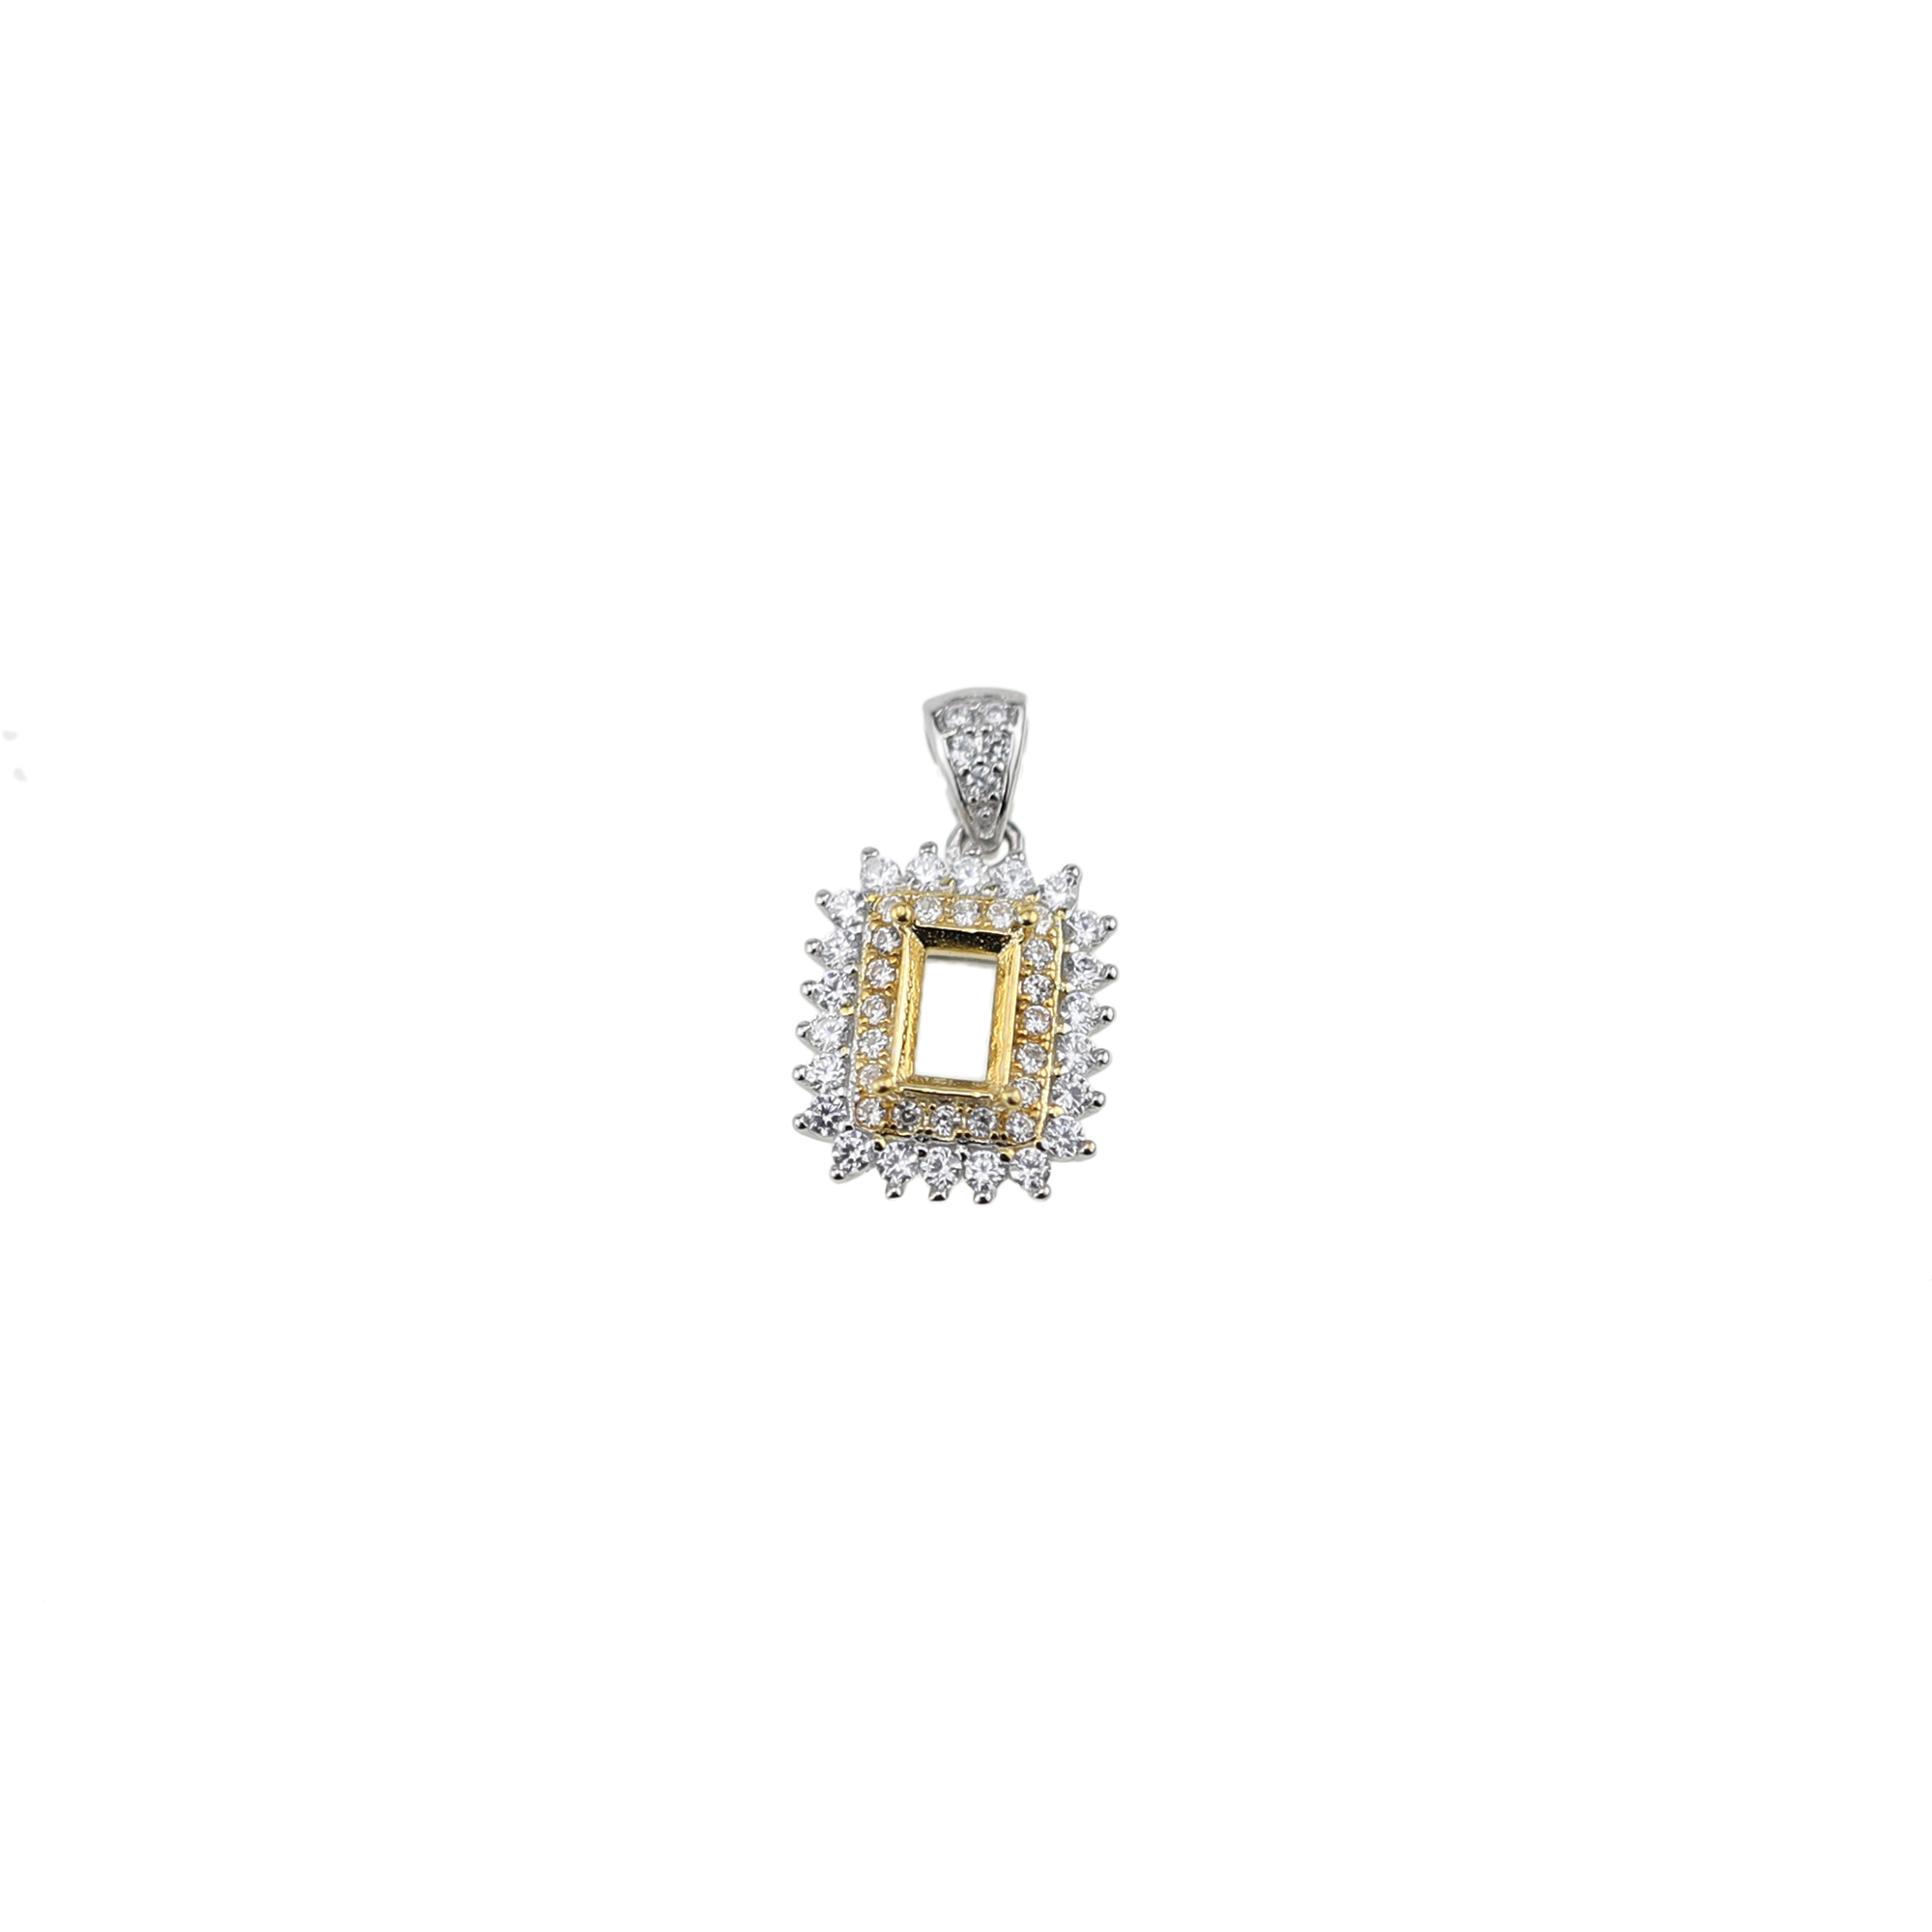 1Pcs 4x6MM Rectangle Prong Bezel Gold Plated Solid 925 Sterling Silver Pave Pendant Blank Settings for Moissanite Gemstone 1431048 - Click Image to Close